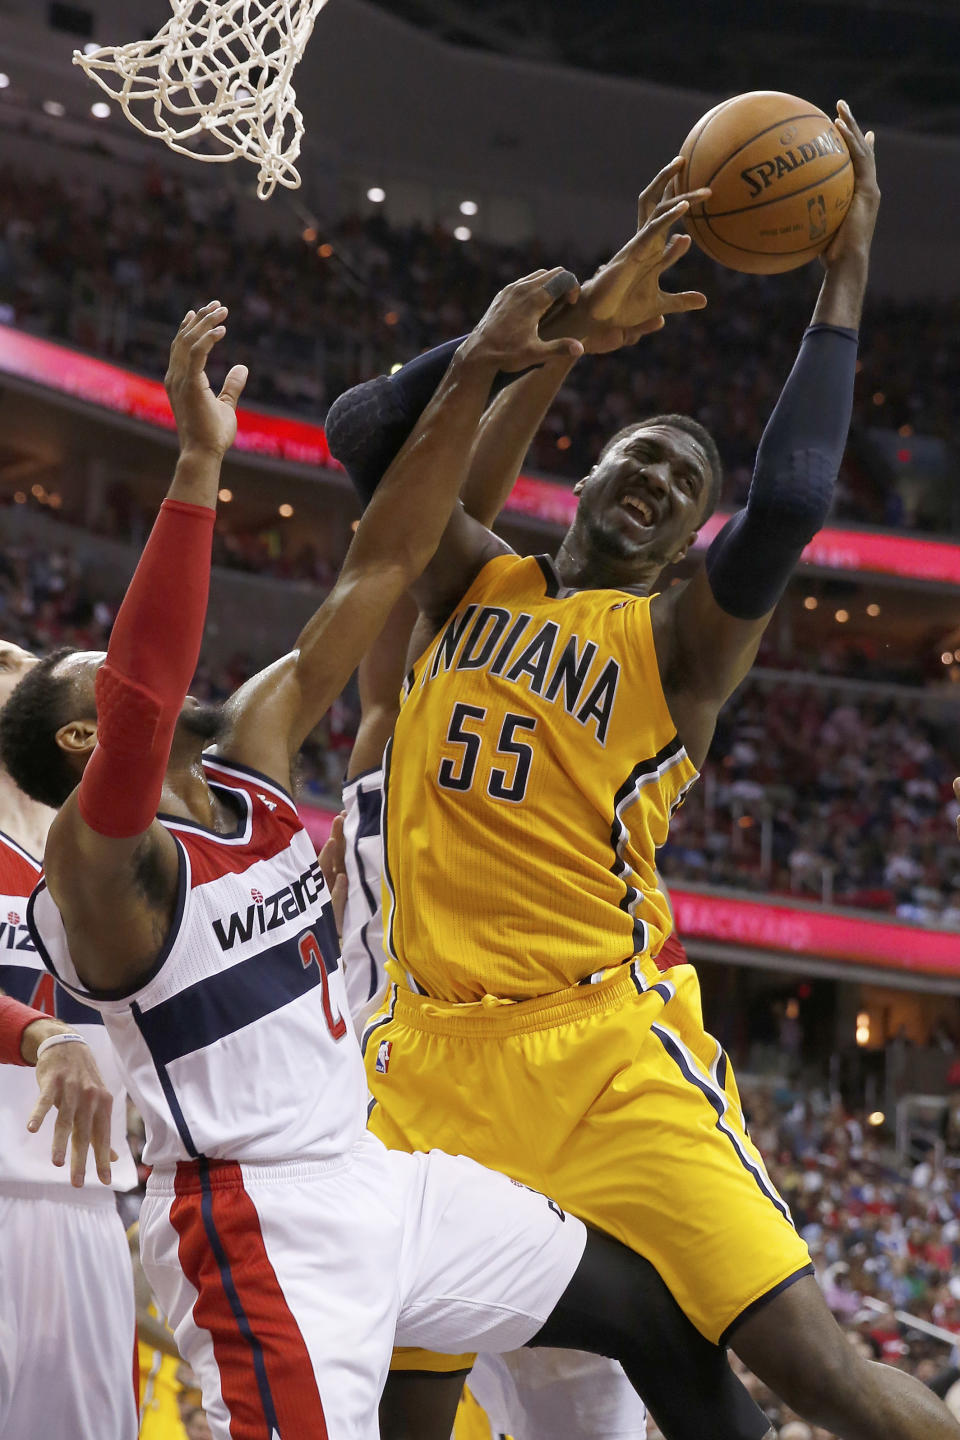 Indiana Pacers center Roy Hibbert (55) collides with Washington Wizards guard John Wall (2) under the basket during the second half of Game 4 of an Eastern Conference semifinal NBA basketball playoff game in Washington, Sunday, May 11, 2014. (AP Photo/Alex Brandon)